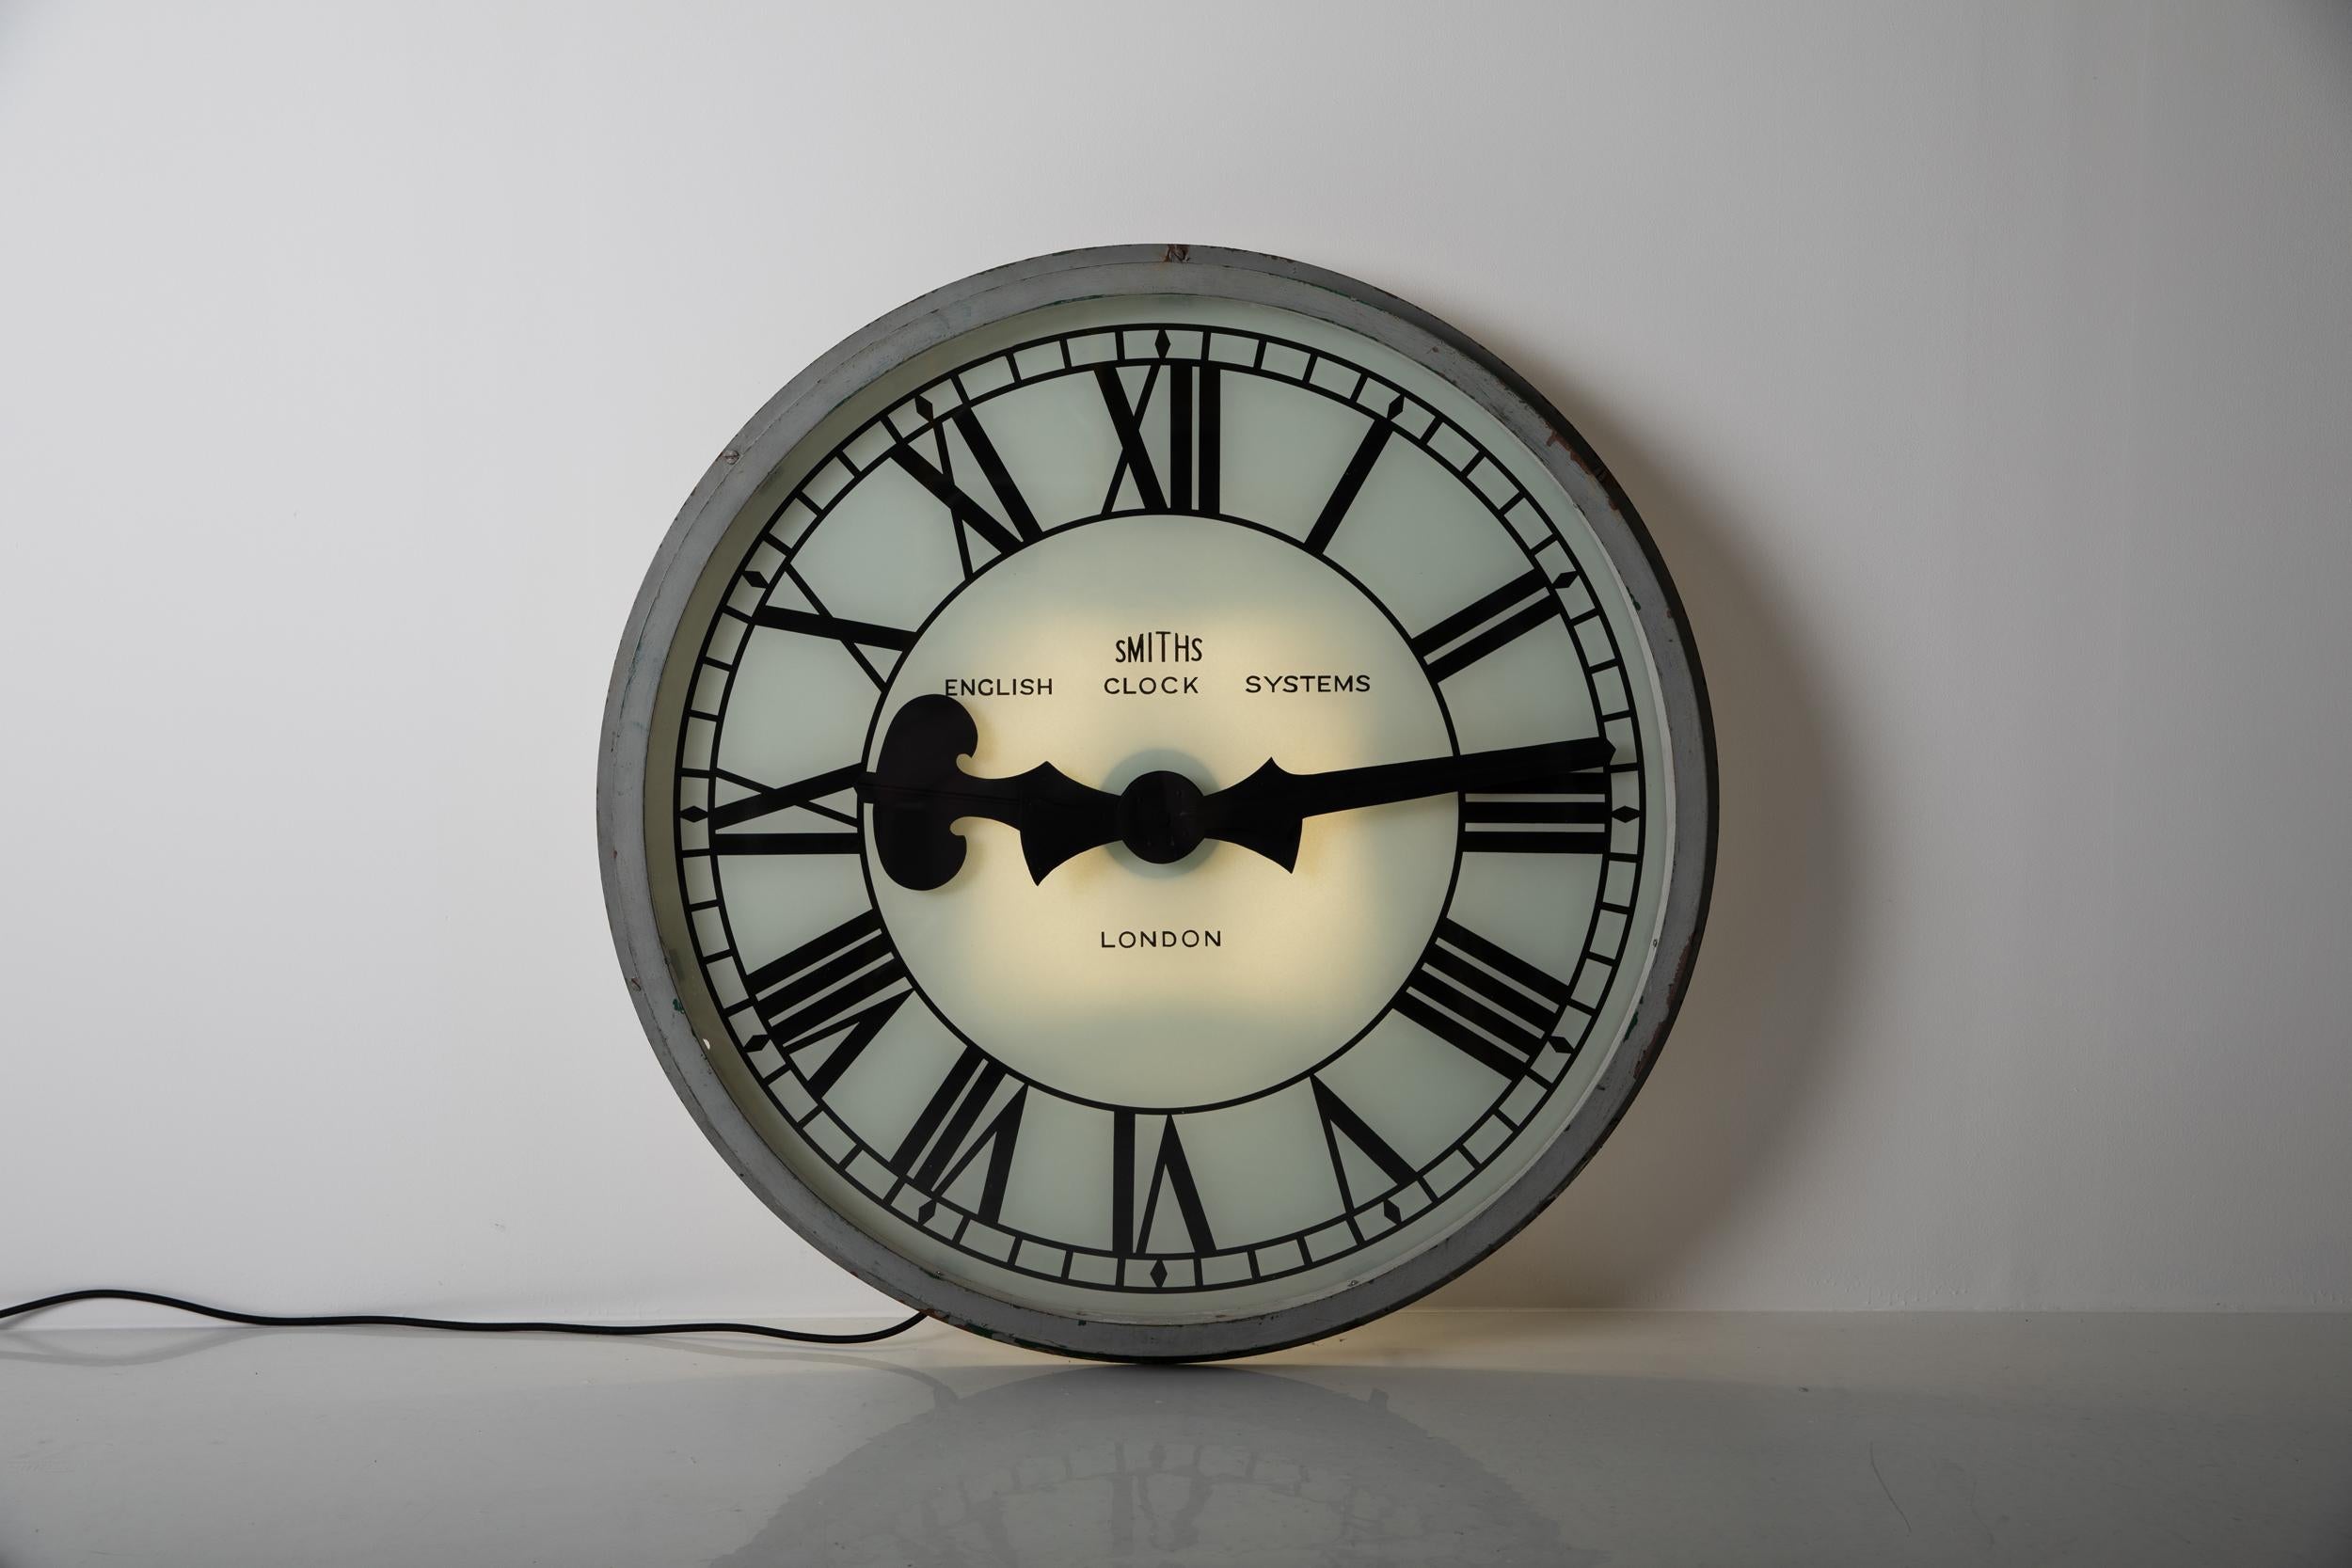 Steel Vintage Industrial Large Illuminated Smiths Electric Wall Clock, C.1930